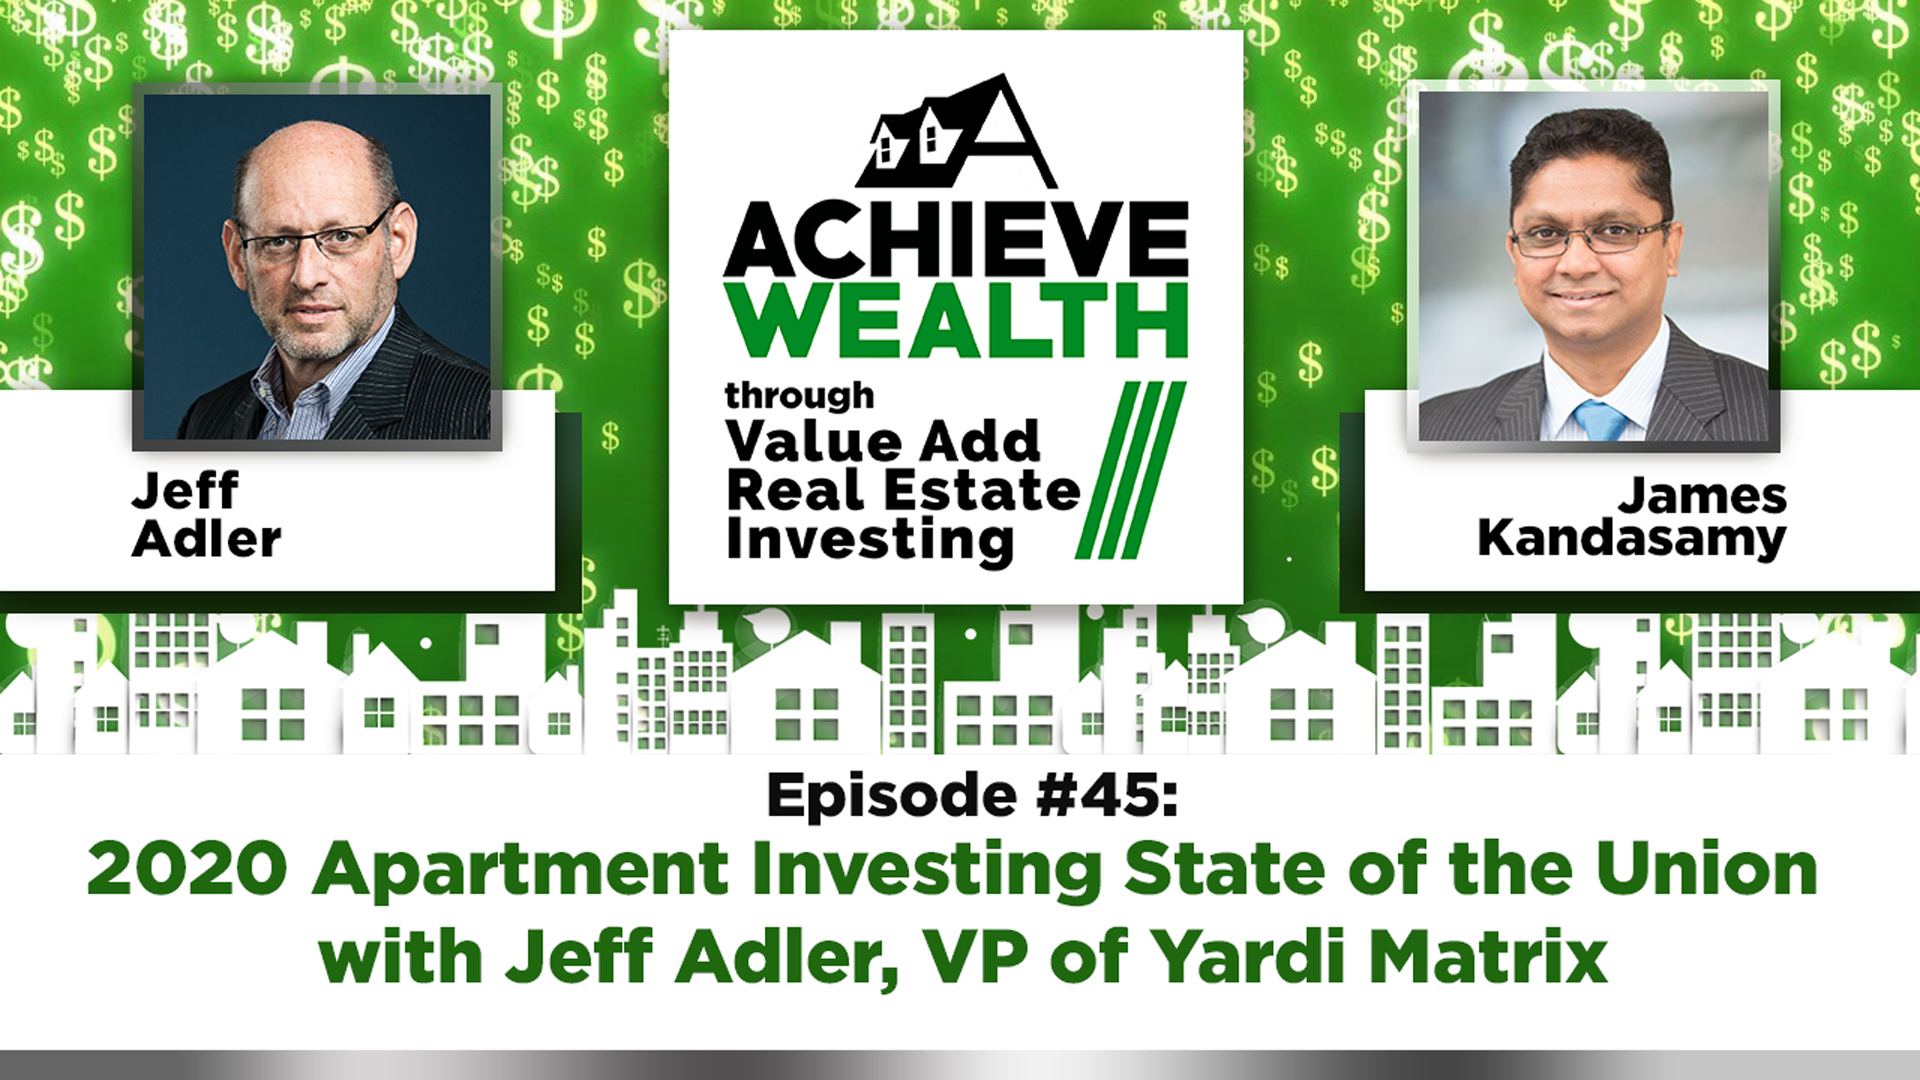 Ep#45 2020 Apartment Investing State of the Union with Jeff Adler, VP of Yardi Matrix